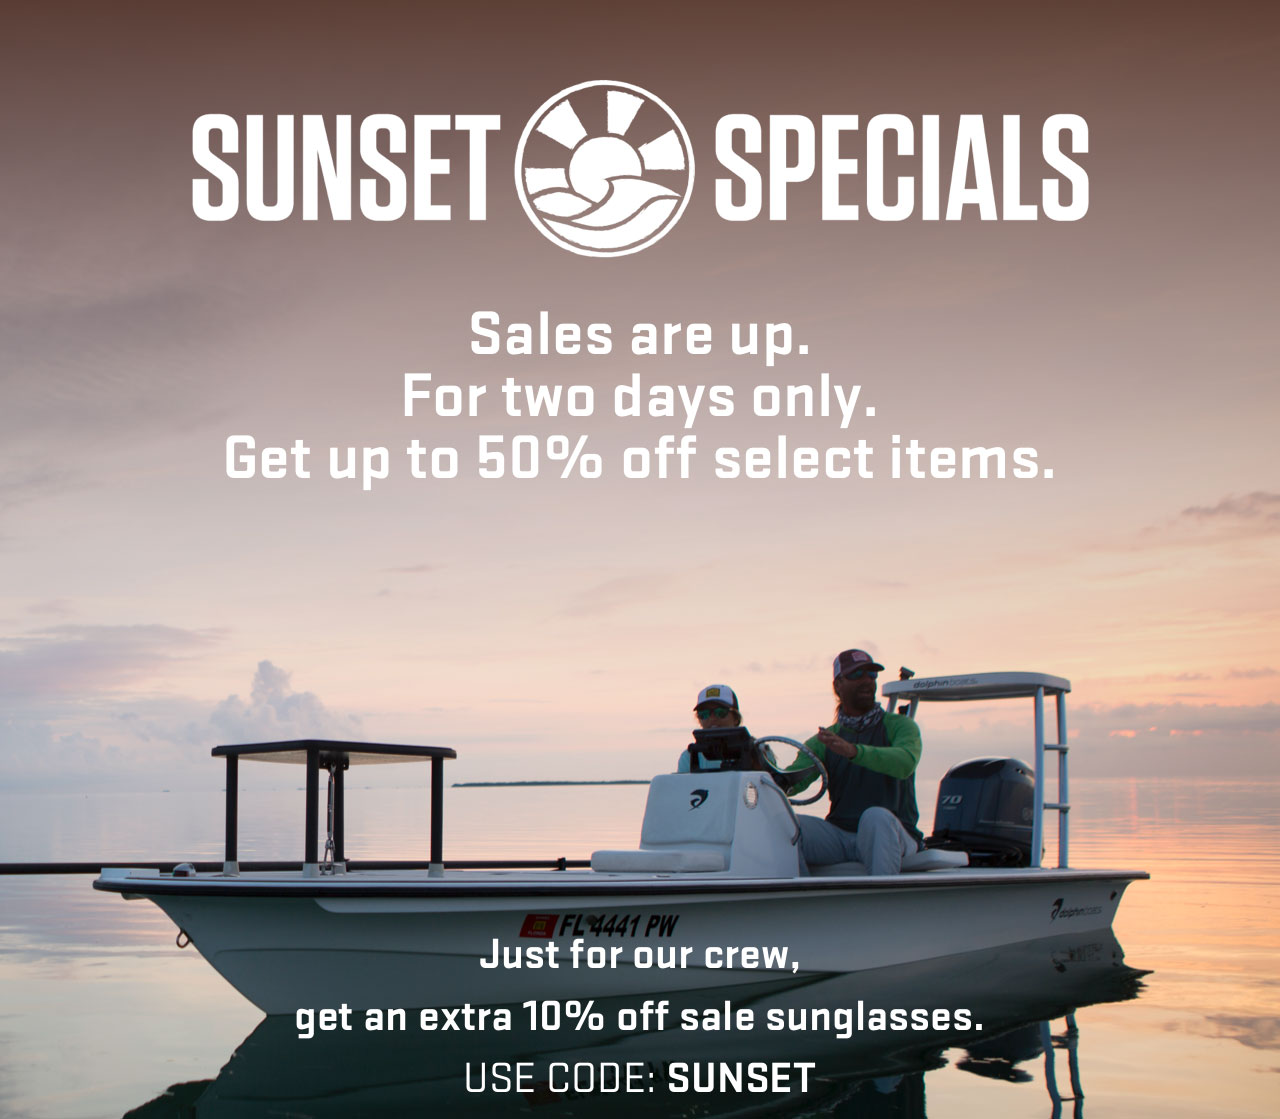 

SUNSET SPECIALS

Sales are up.
For two days only.
Get up to 50% off select items.

Just for our crew,
get an extra 10% off sale sunglasses.
USE CODE: SUNSET


									